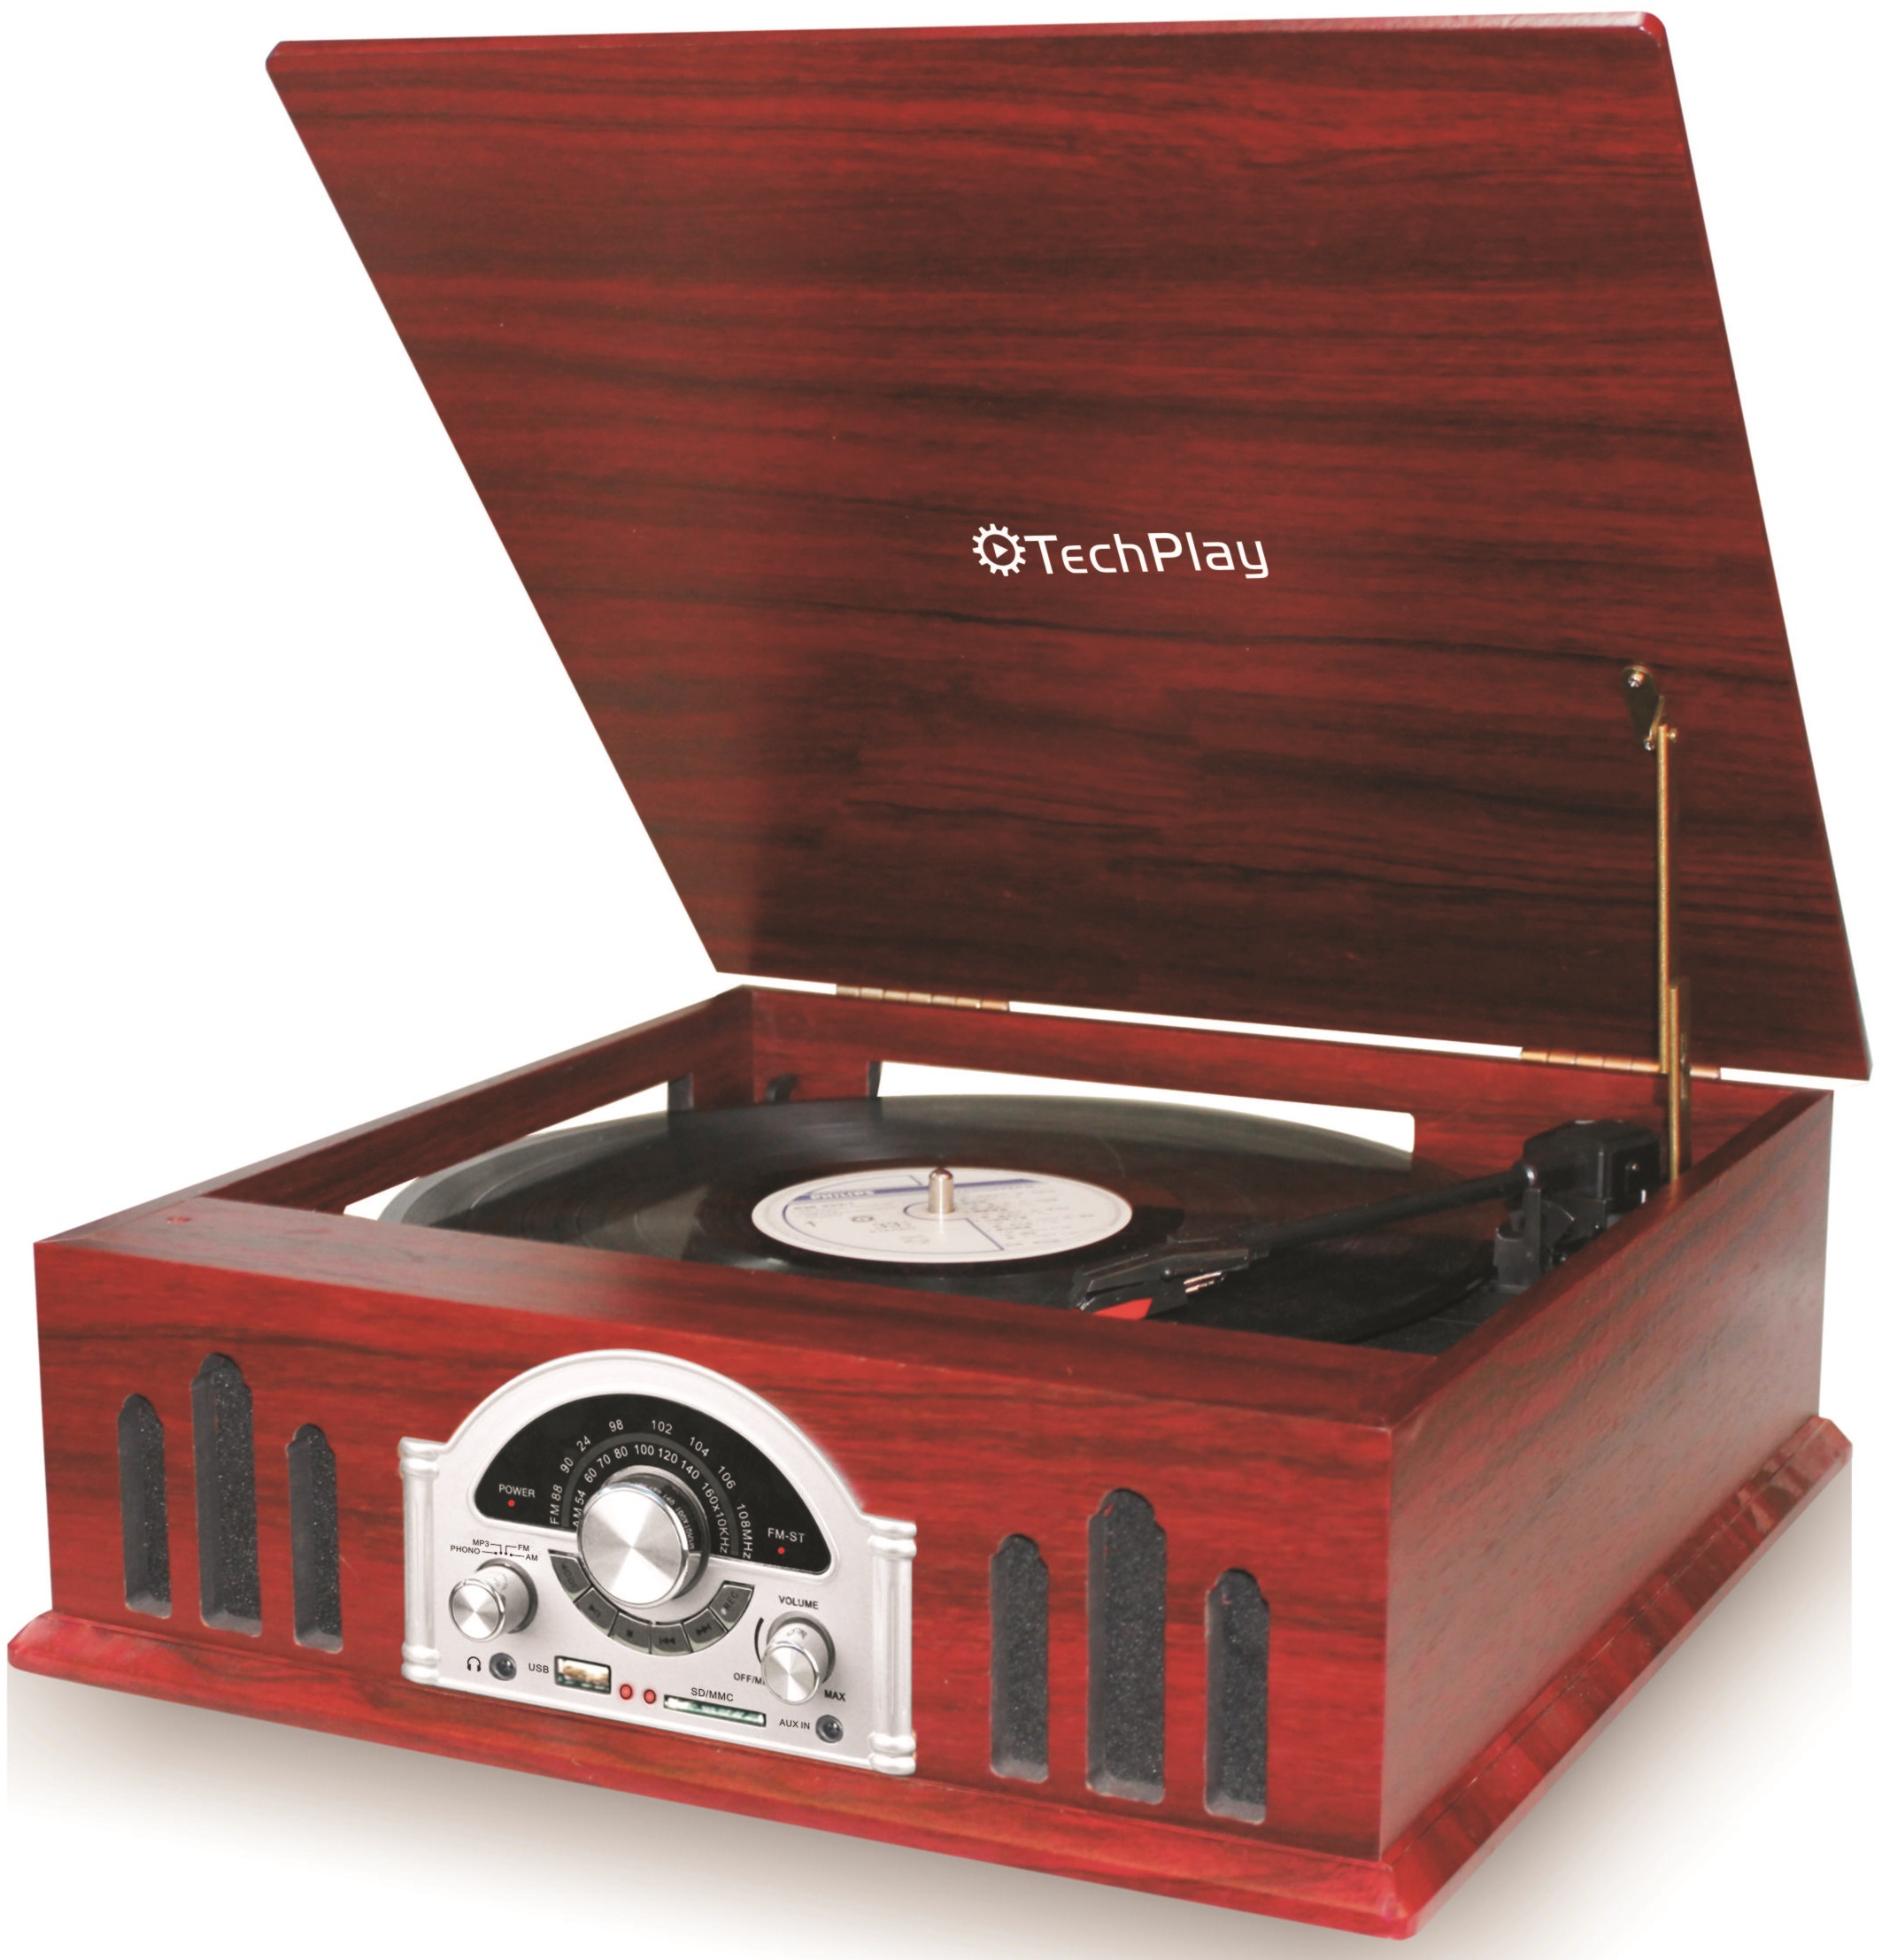 TechPlay TCP2916WD 3 speed (33/45/78) turntable with MP3 player,